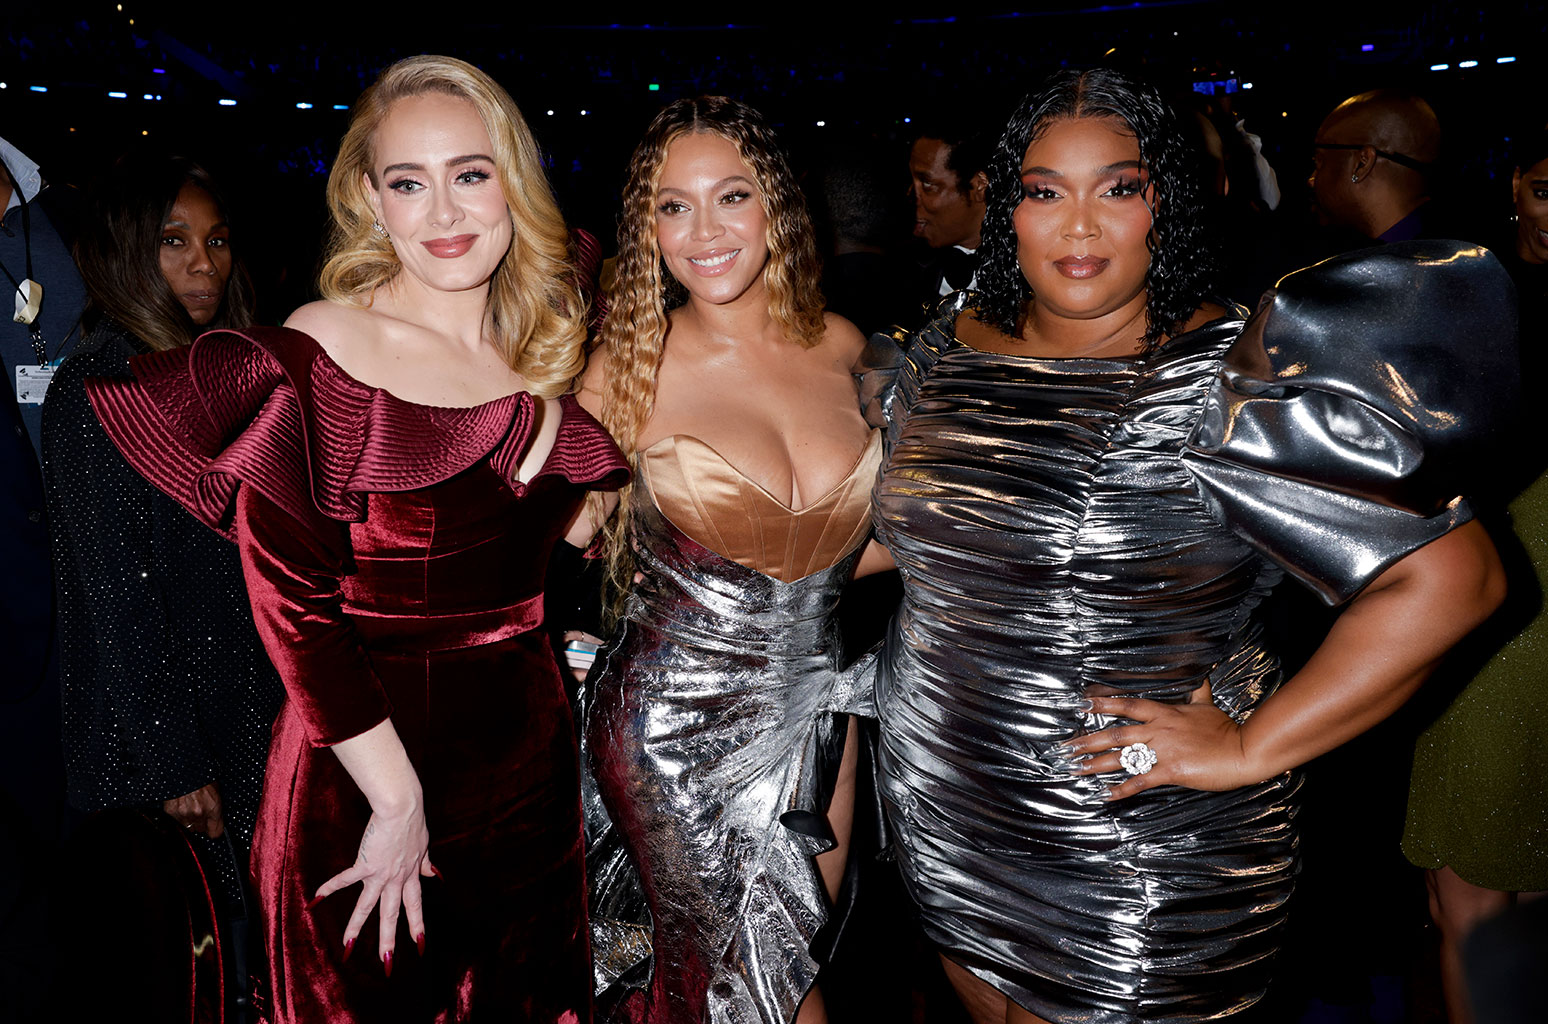 Backstage Photo at 2023 Grammys: Performances and More